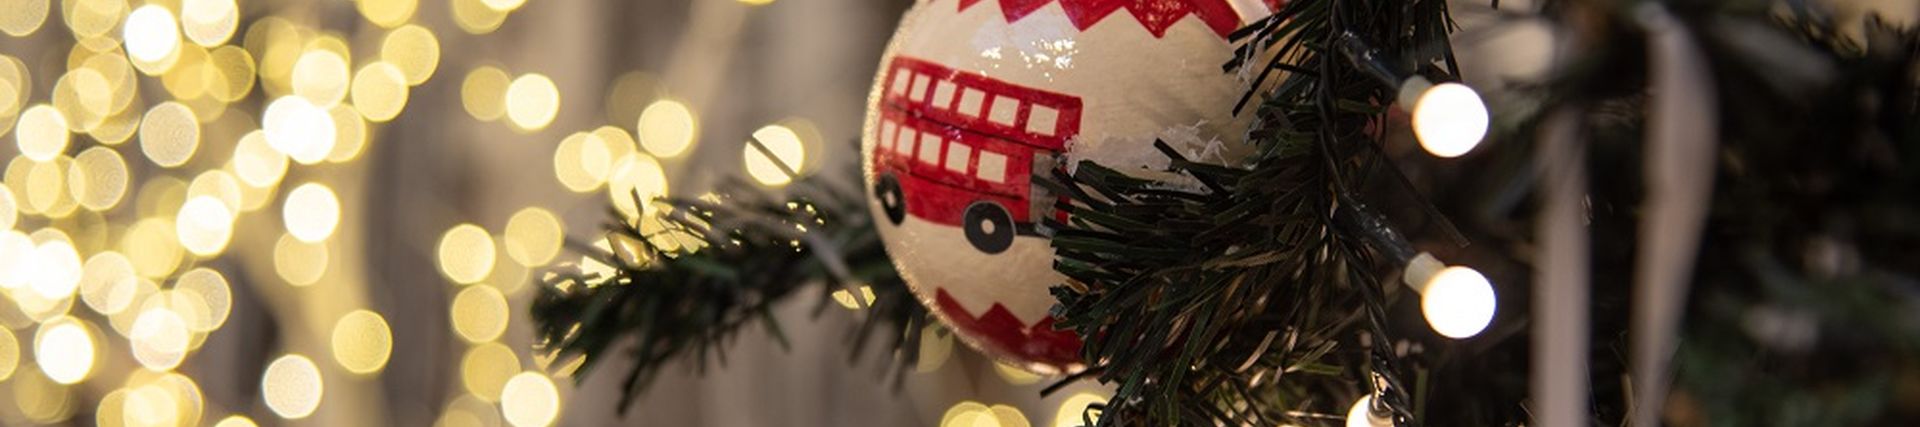 Christmas bauble with a red bus hanging on a Christmas tree in front of fairy lights